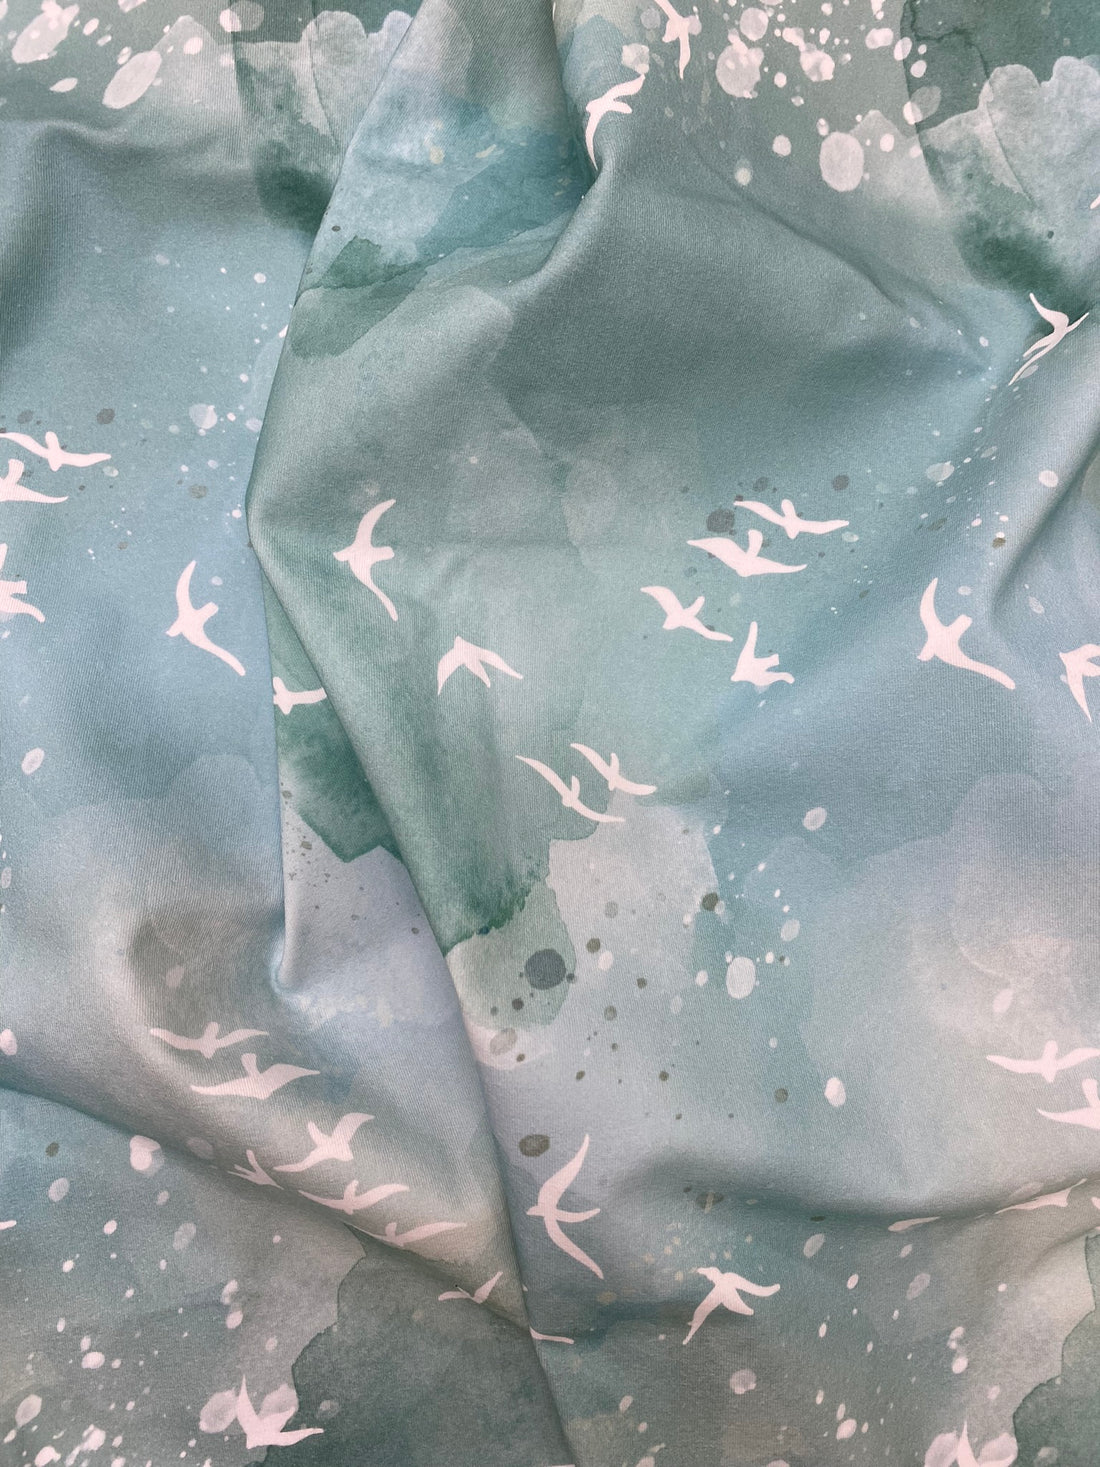 Fabric with green background and white birds flying around